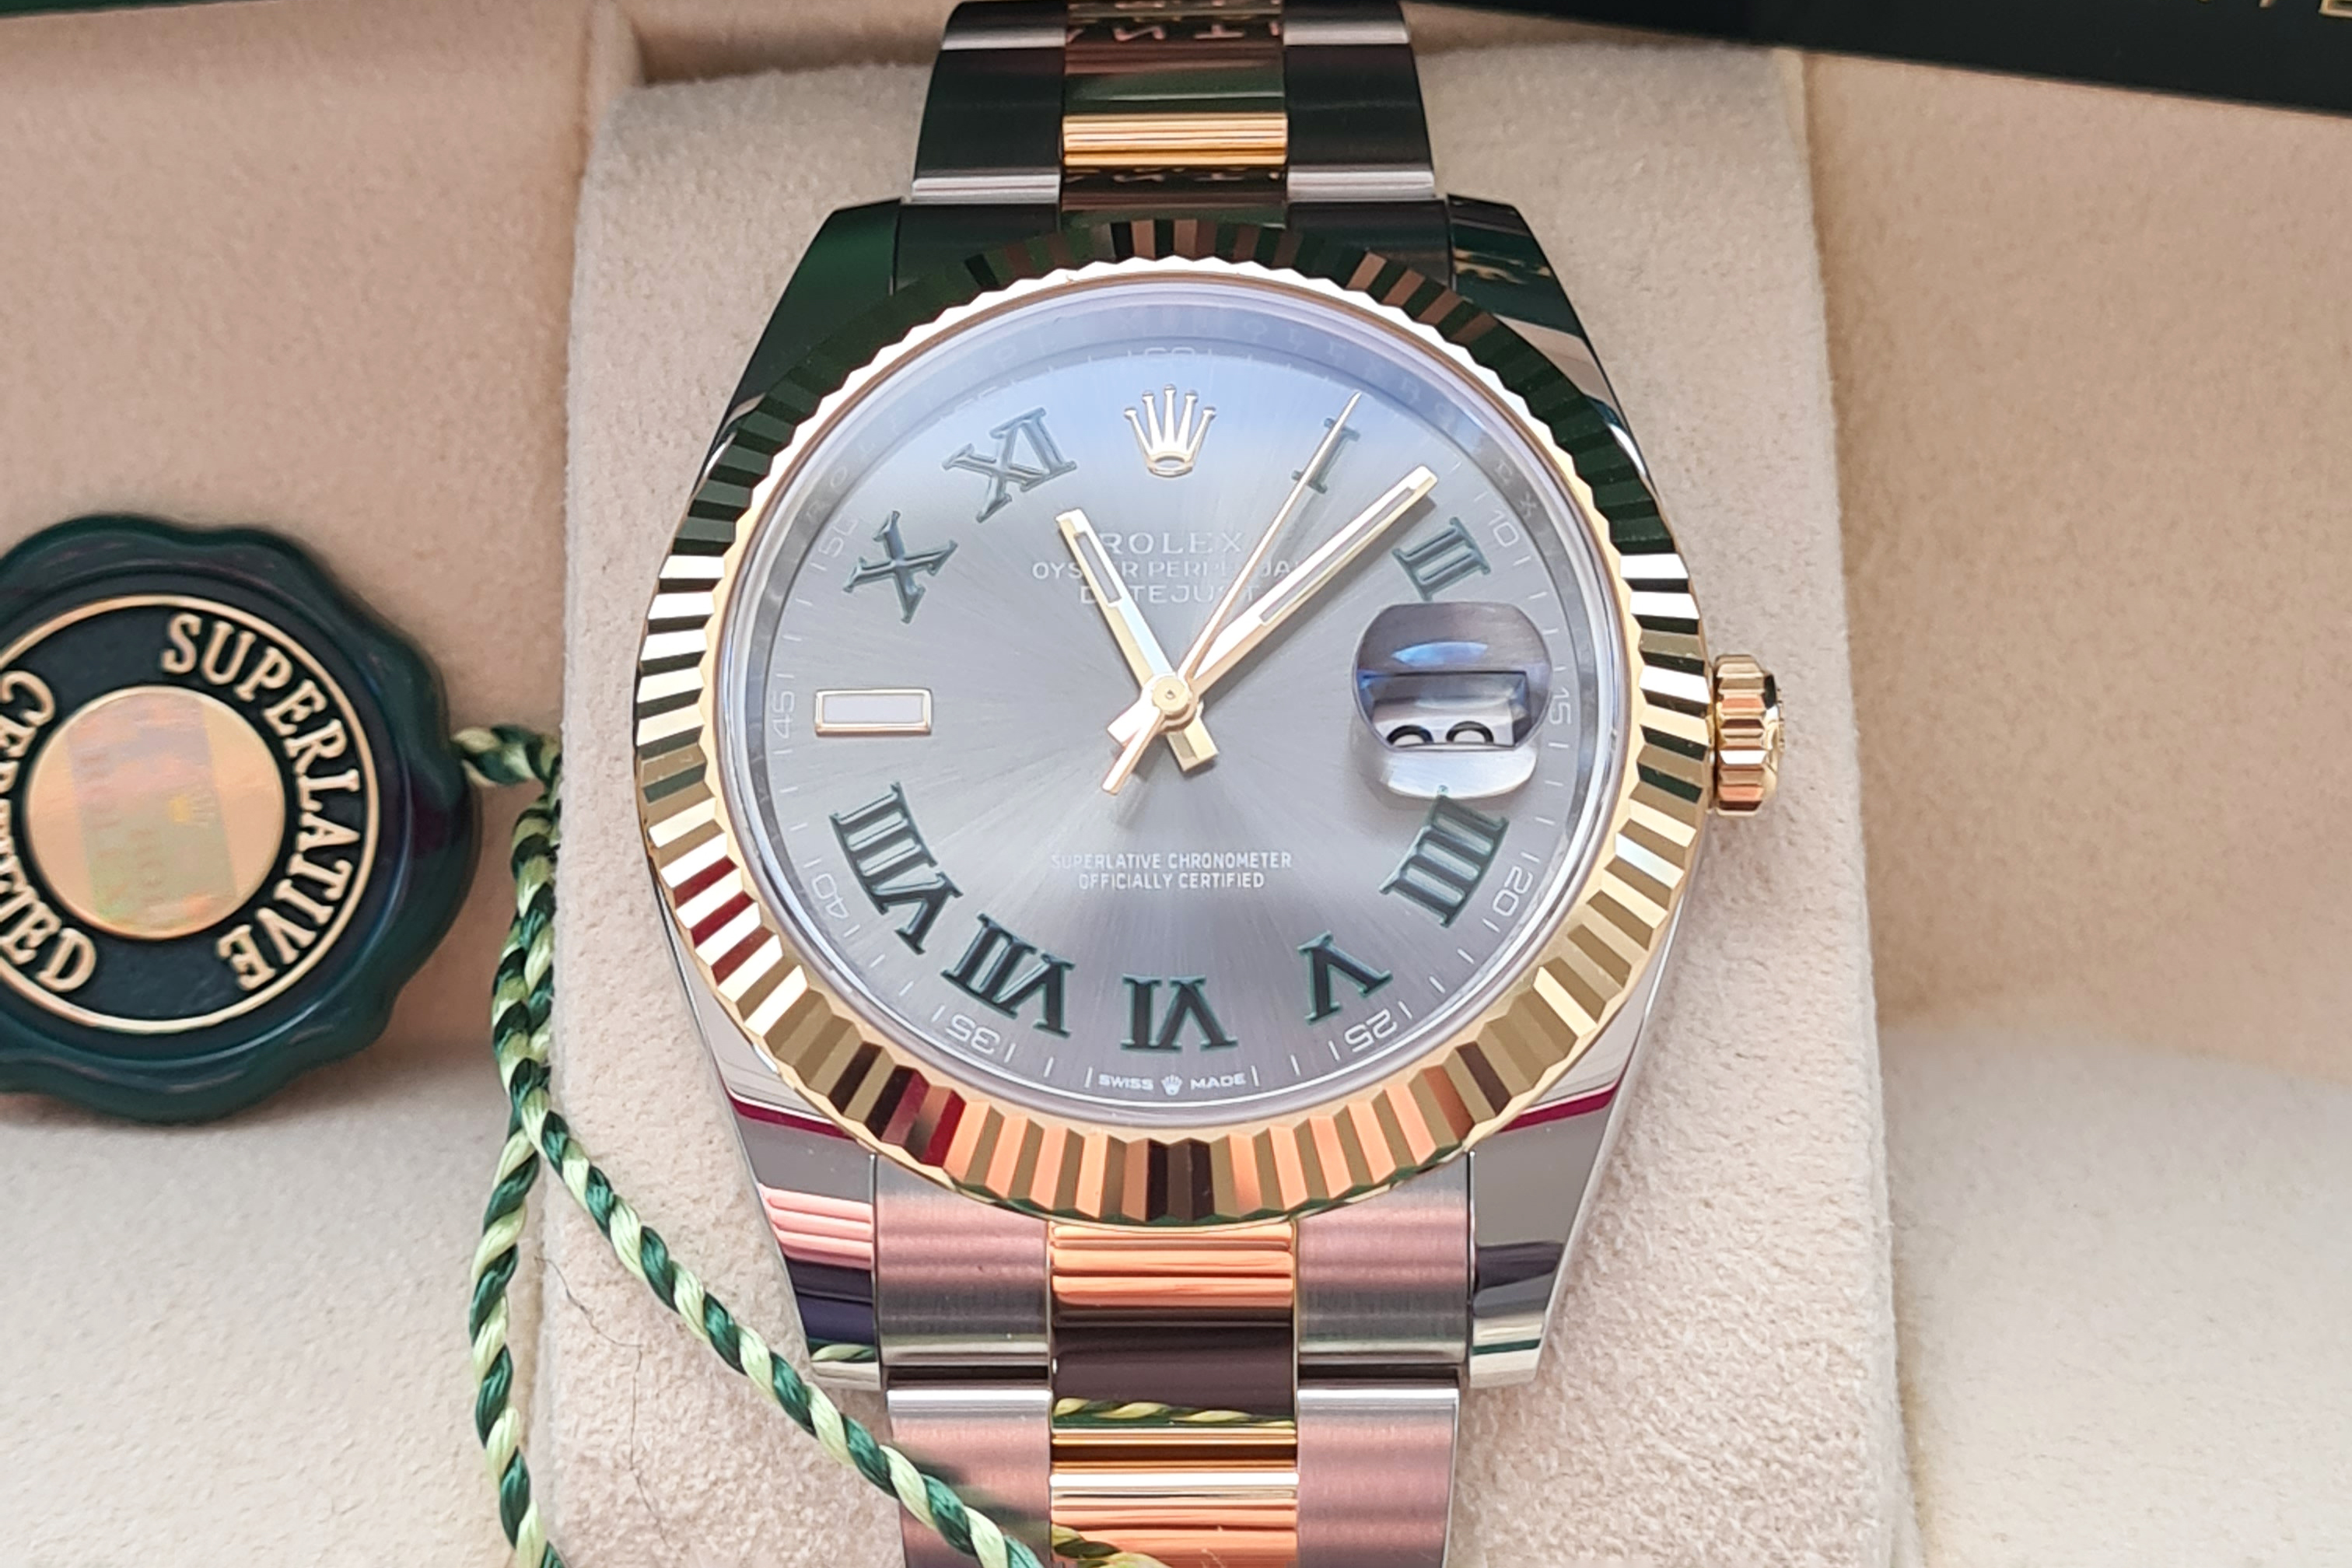 2022 ROLEX DATEJUST 41 WIMBLEDON for sale by auction in Chester, Cheshire, United Kingdom